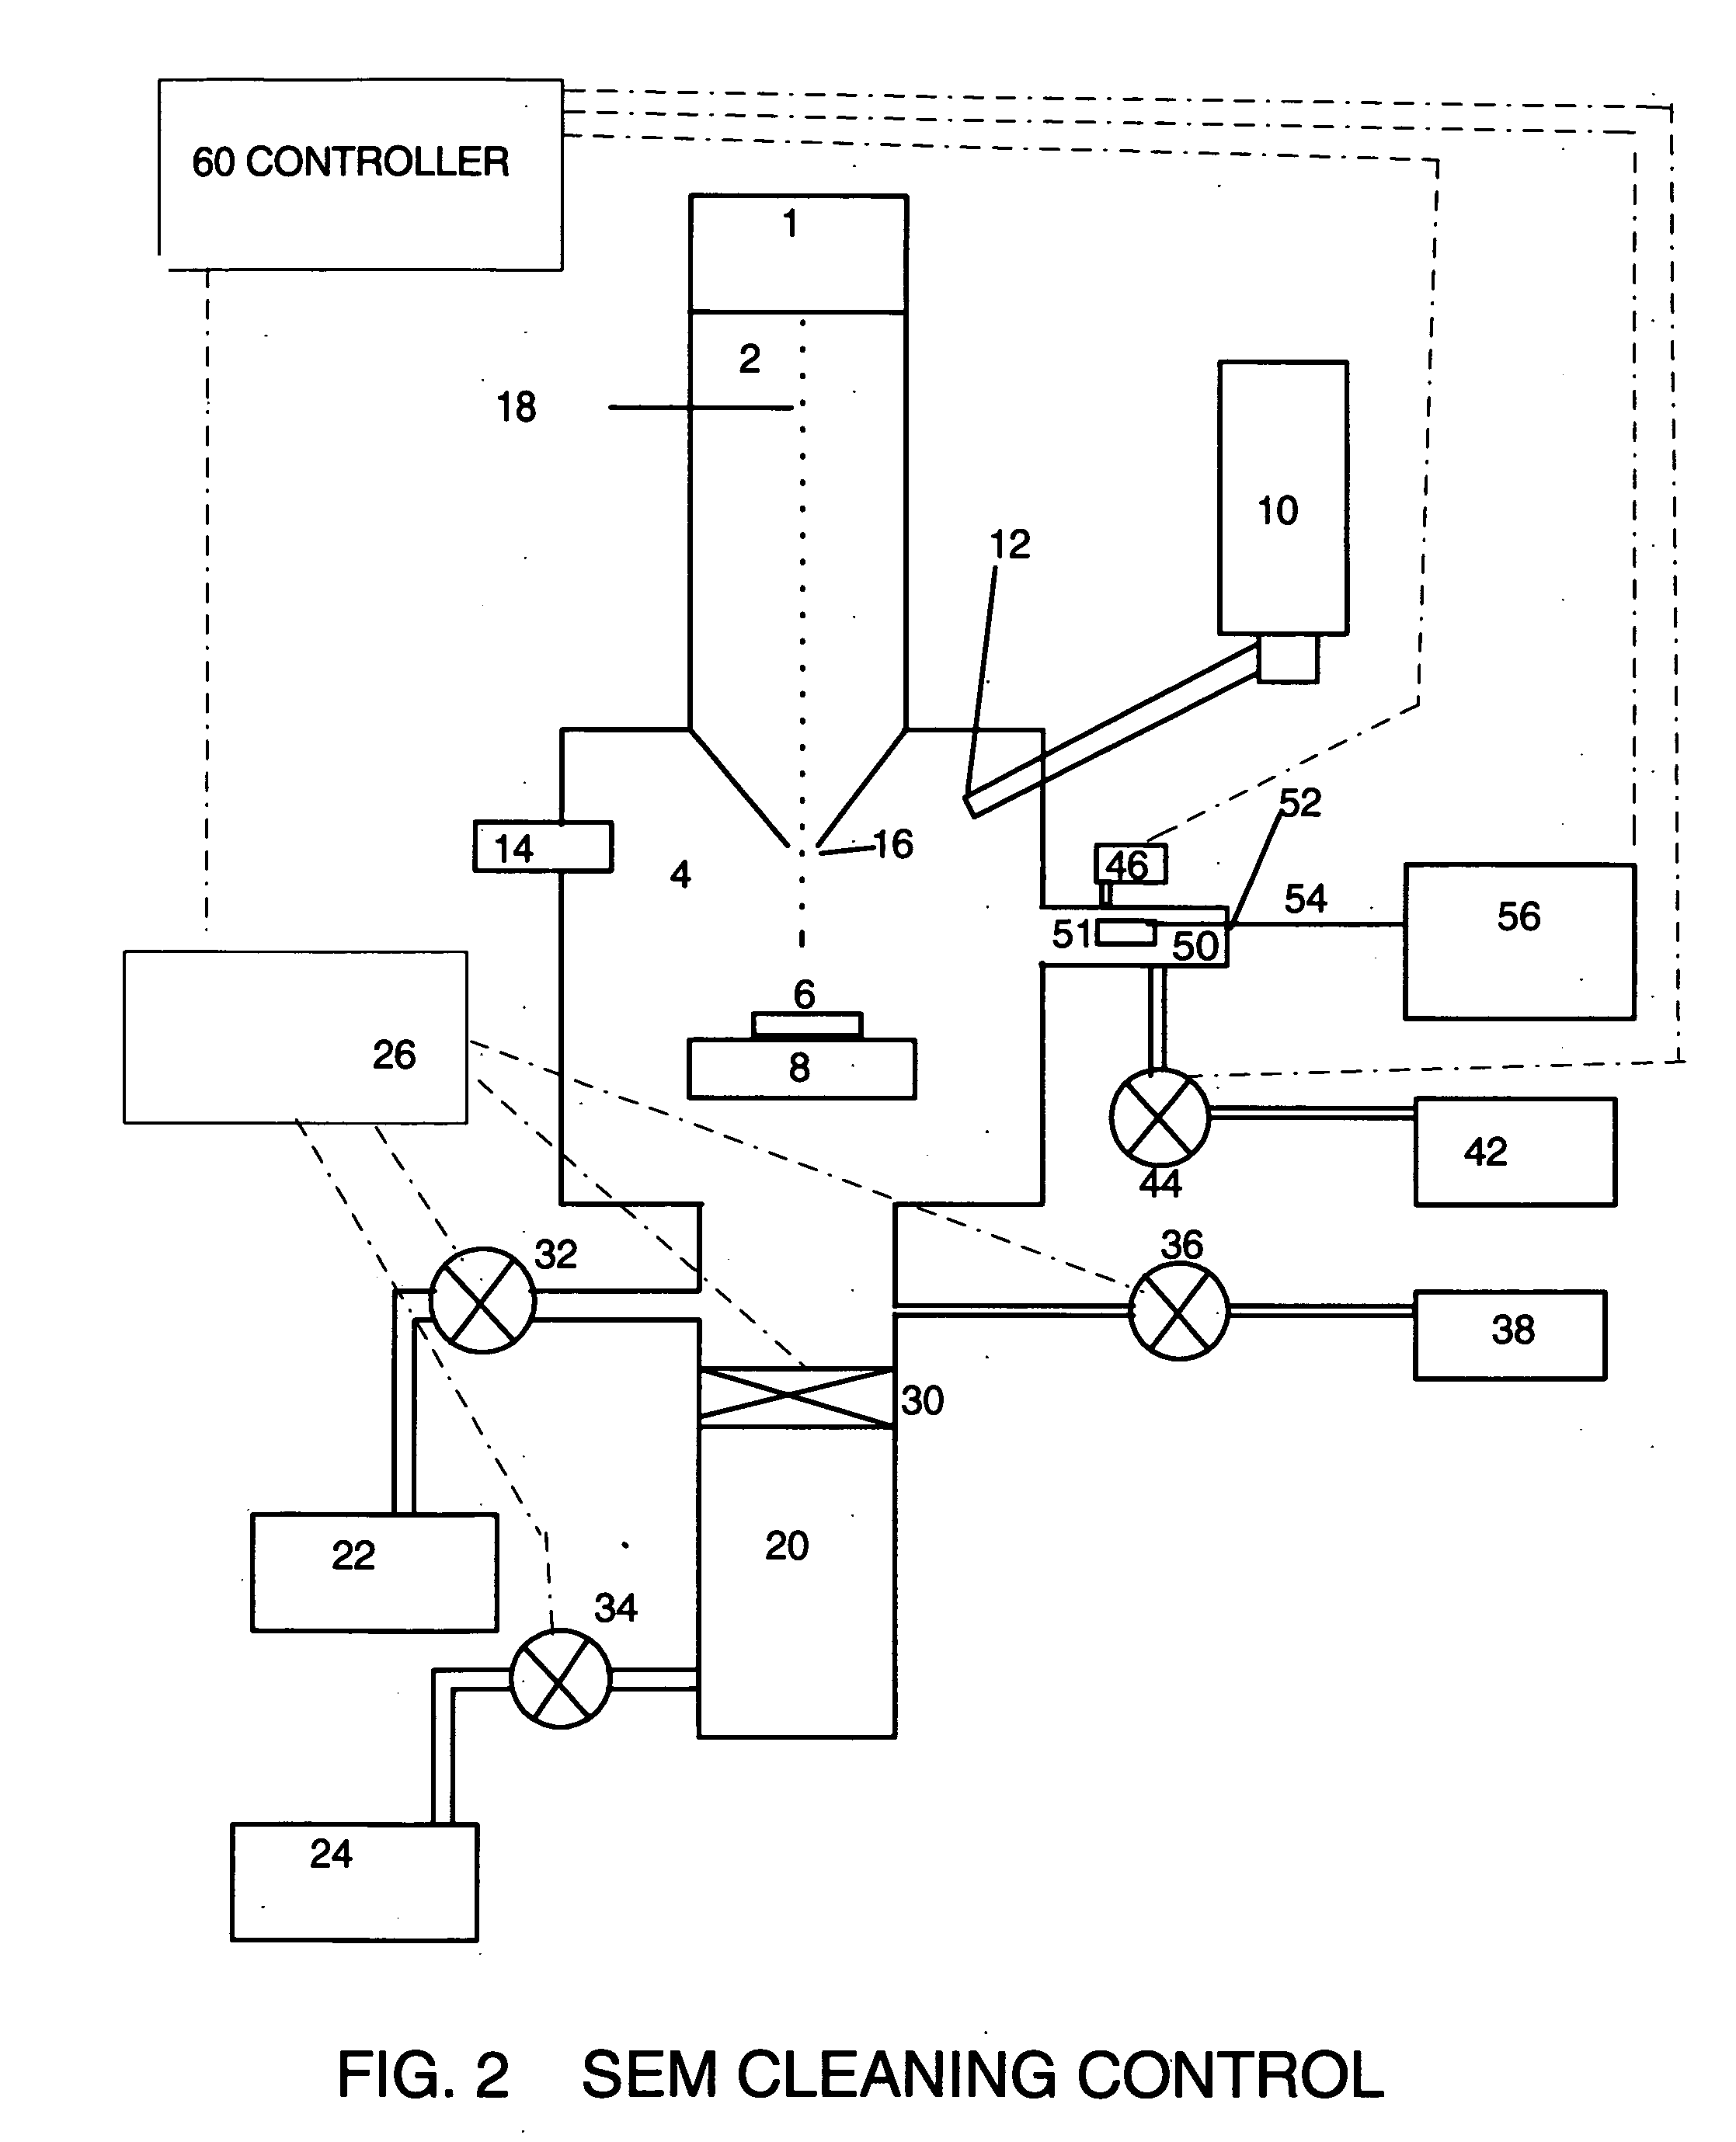 Oxidative cleaning method and apparatus for electron microscopes using UV excitation in a oxygen radical source